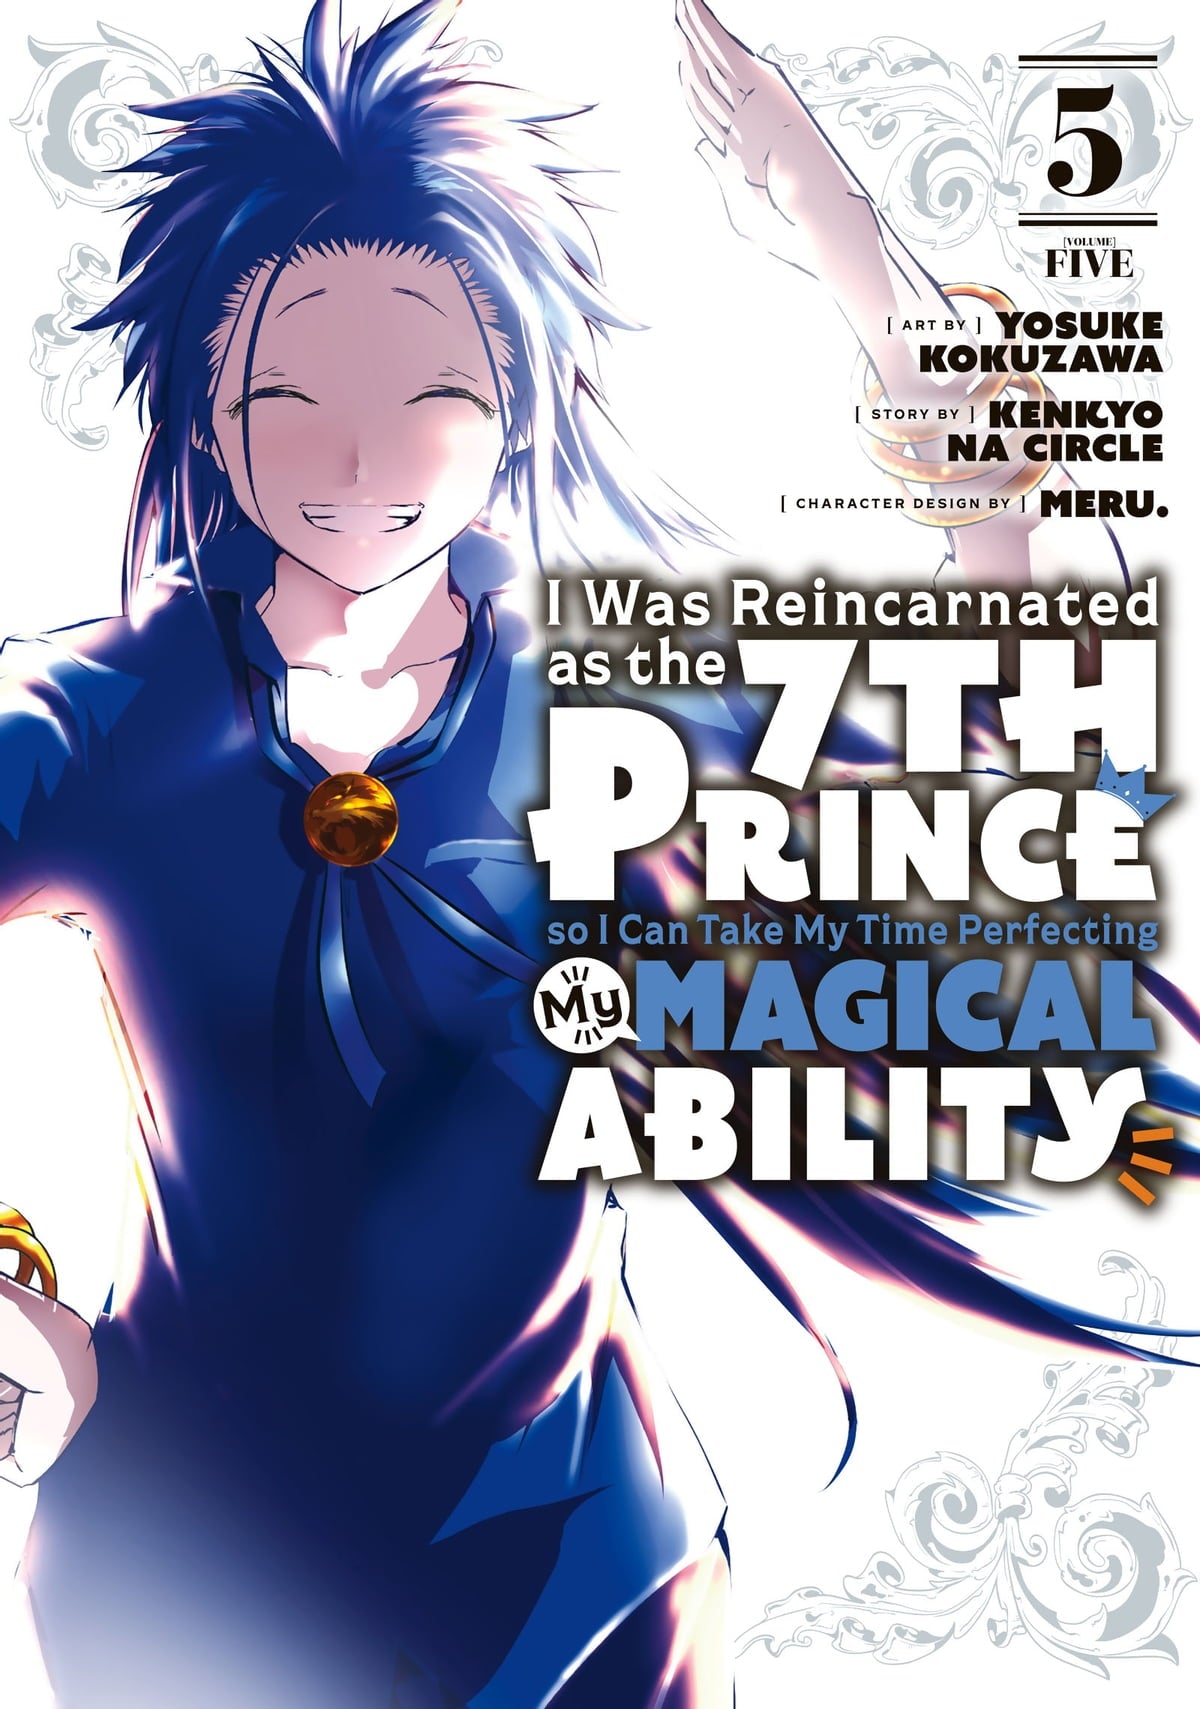 I Was Reincarnated as the 7th Prince so I Can Take My Time Perfecting My Magical Ability (Manga) Vol. 05